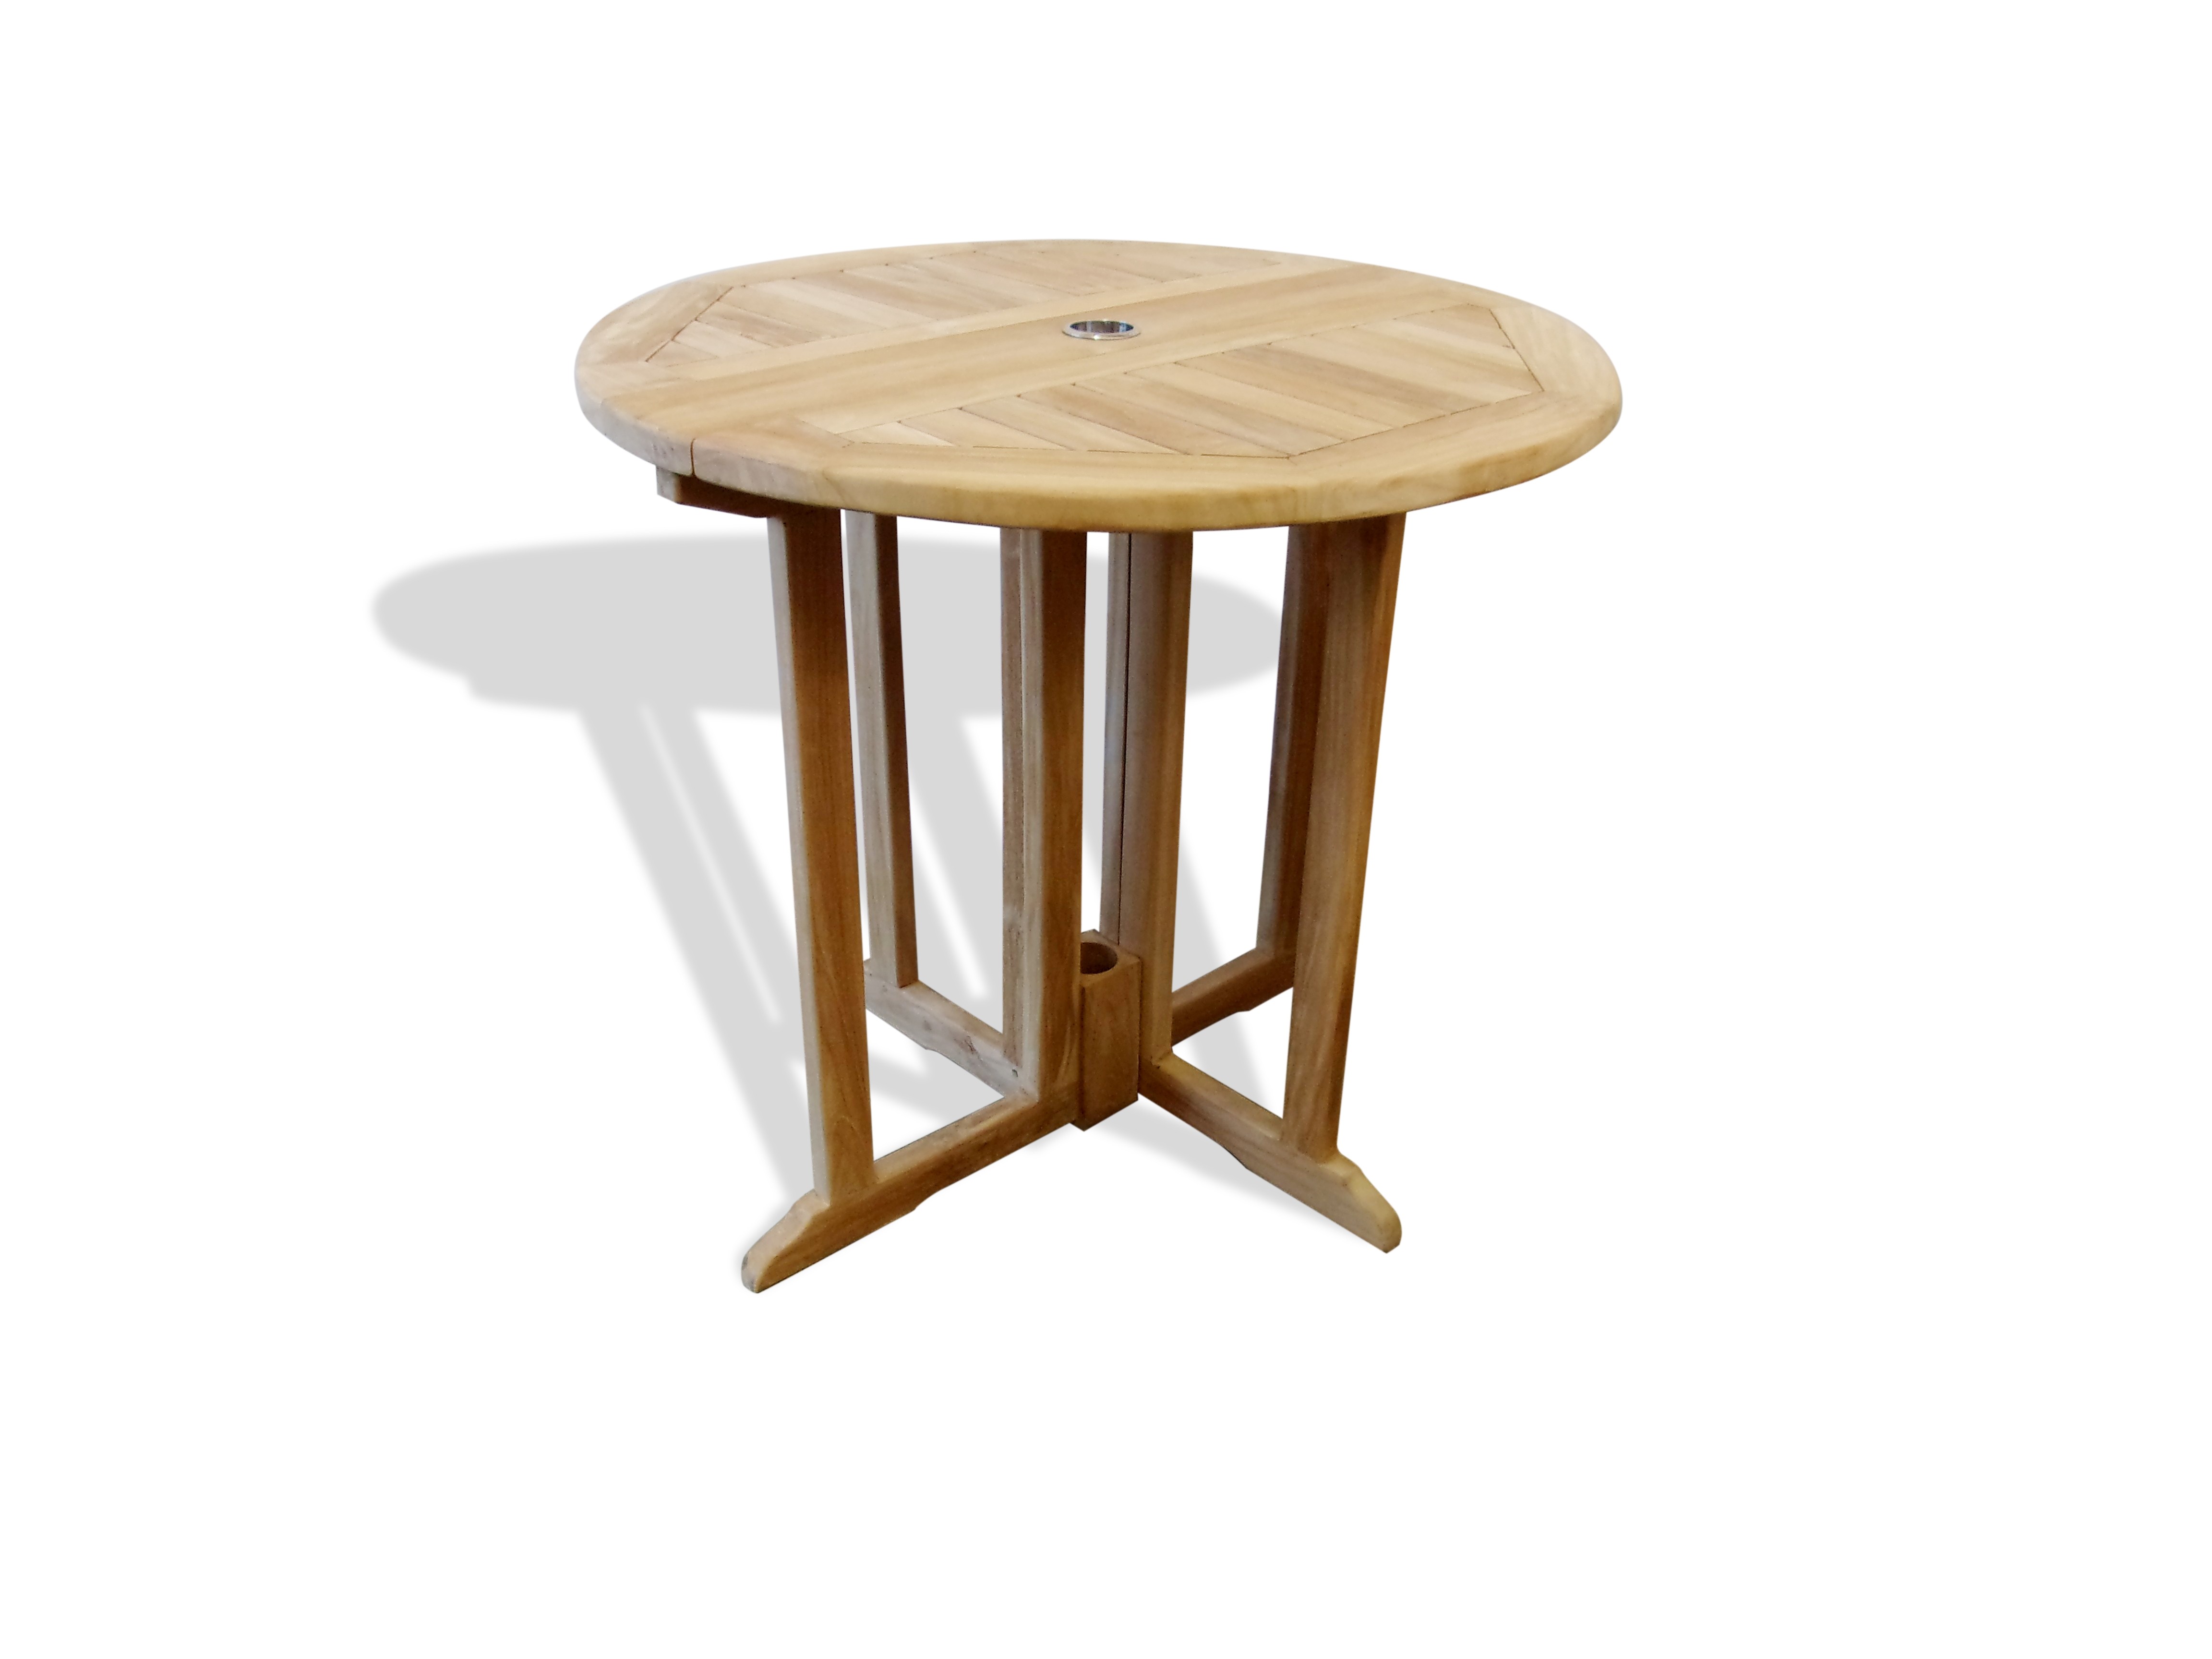 Barcelona 32" Round Drop Leaf Folding Table ...use with 1 Leaf Up or 2.... Makes 2 different tables